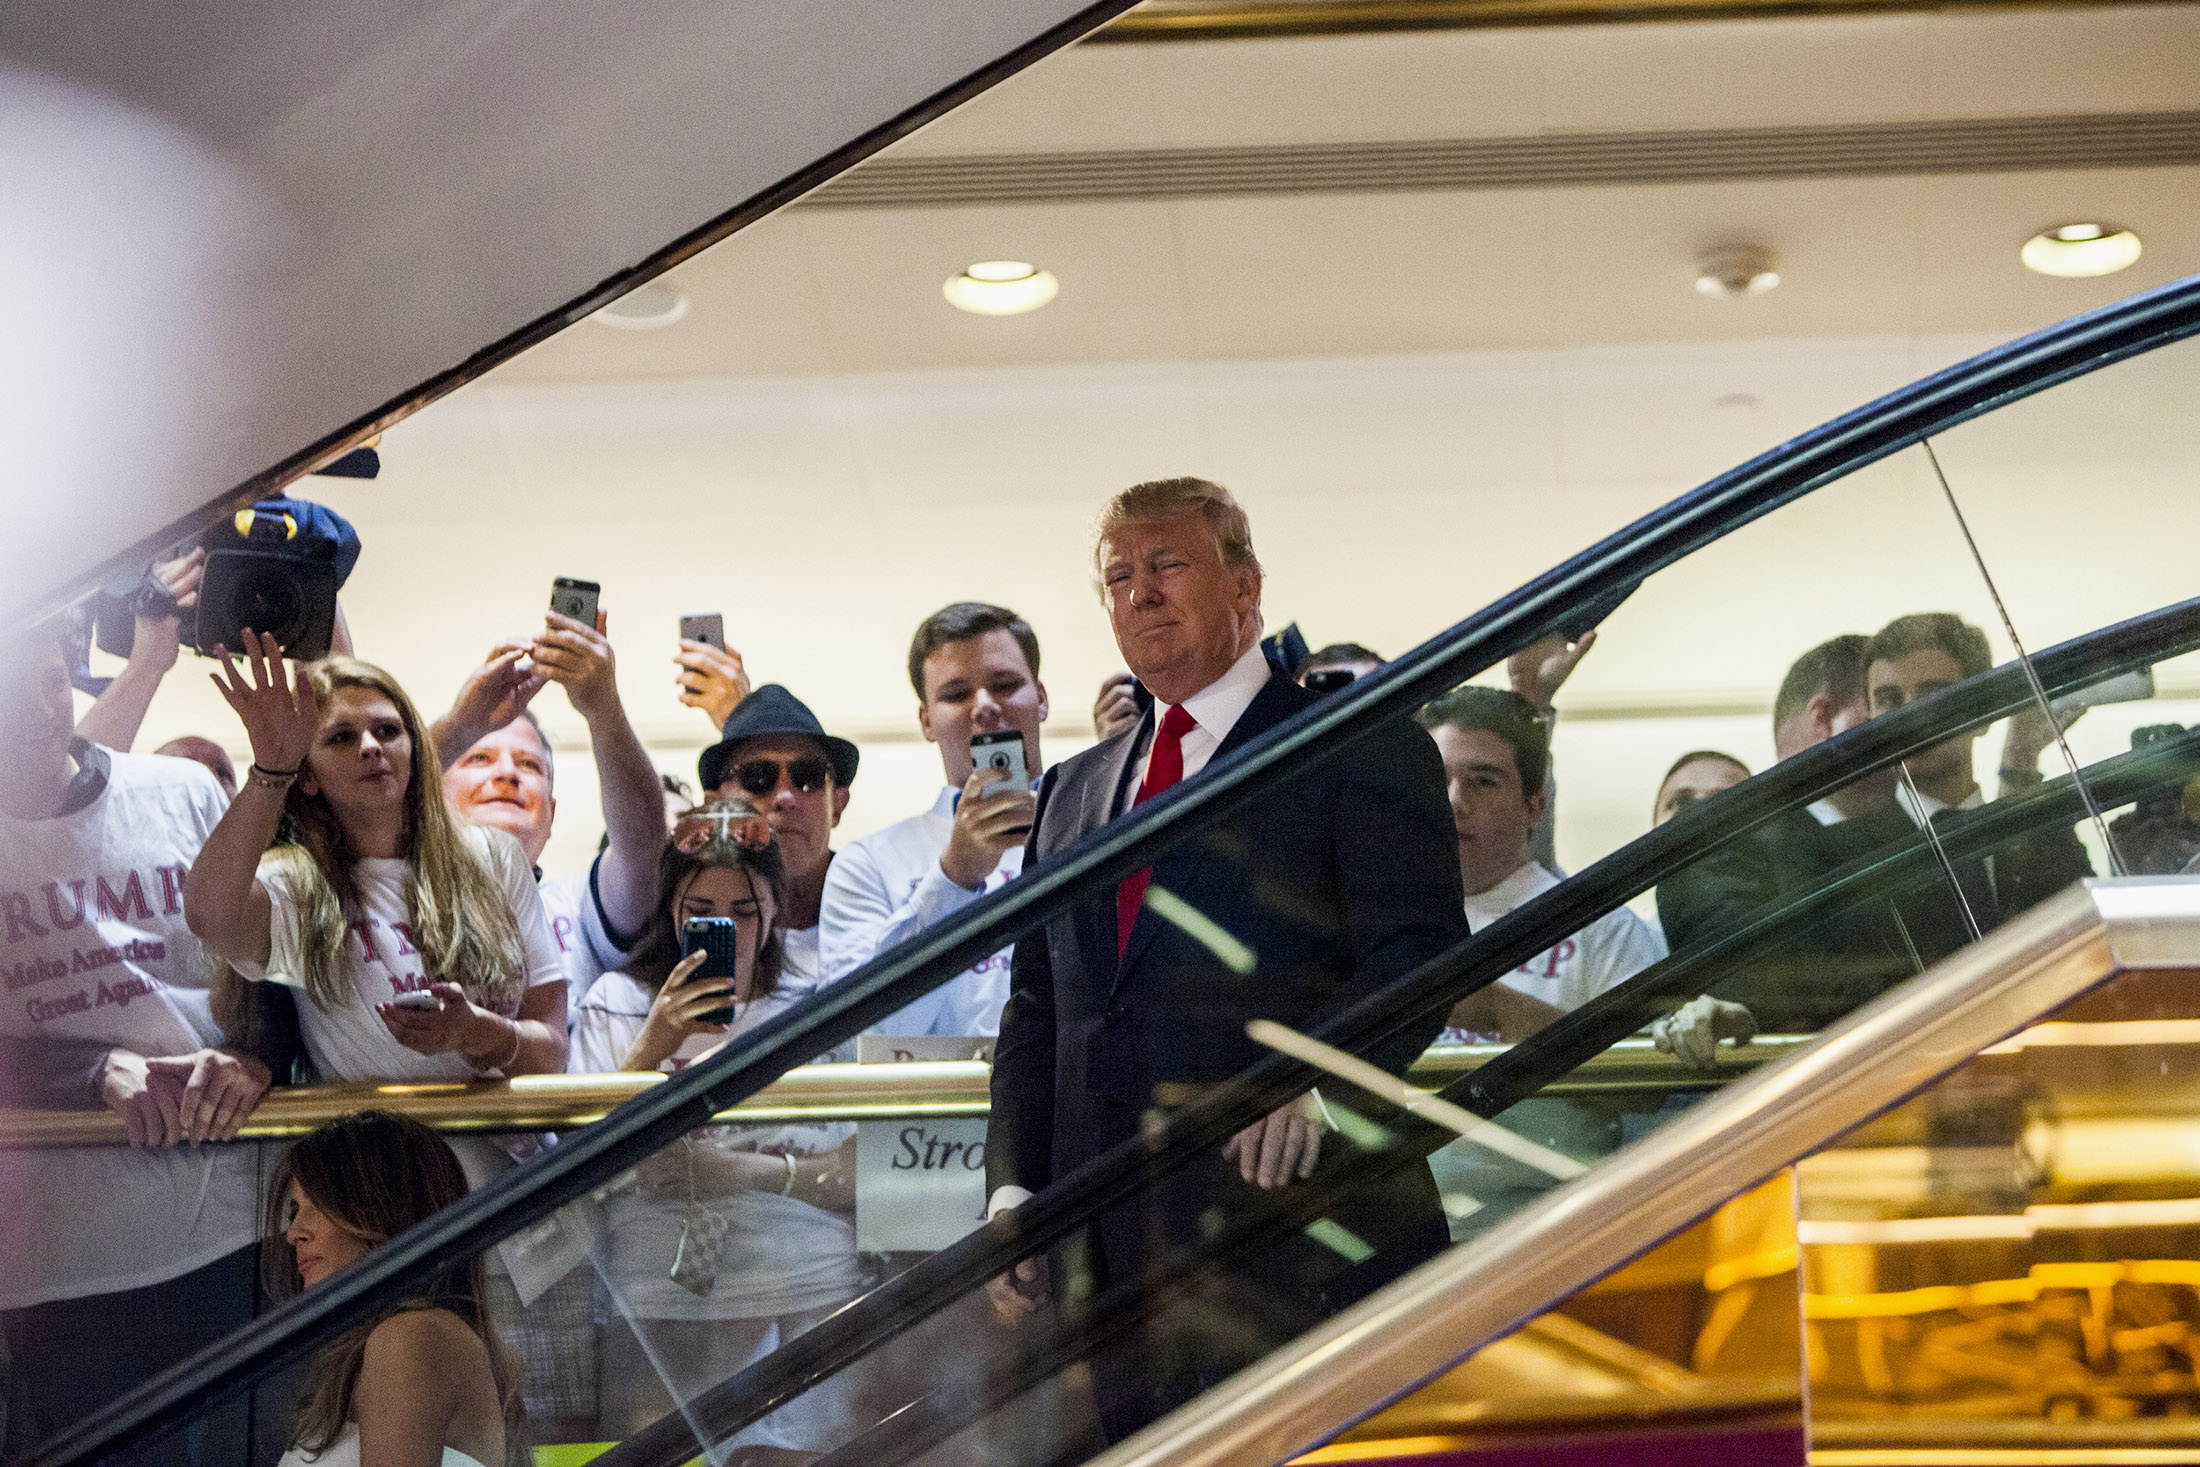 Donald Trump arrives at a press event where he announced his candidacy for the US presidency at Trump Tower in New York on June 16, 2015.